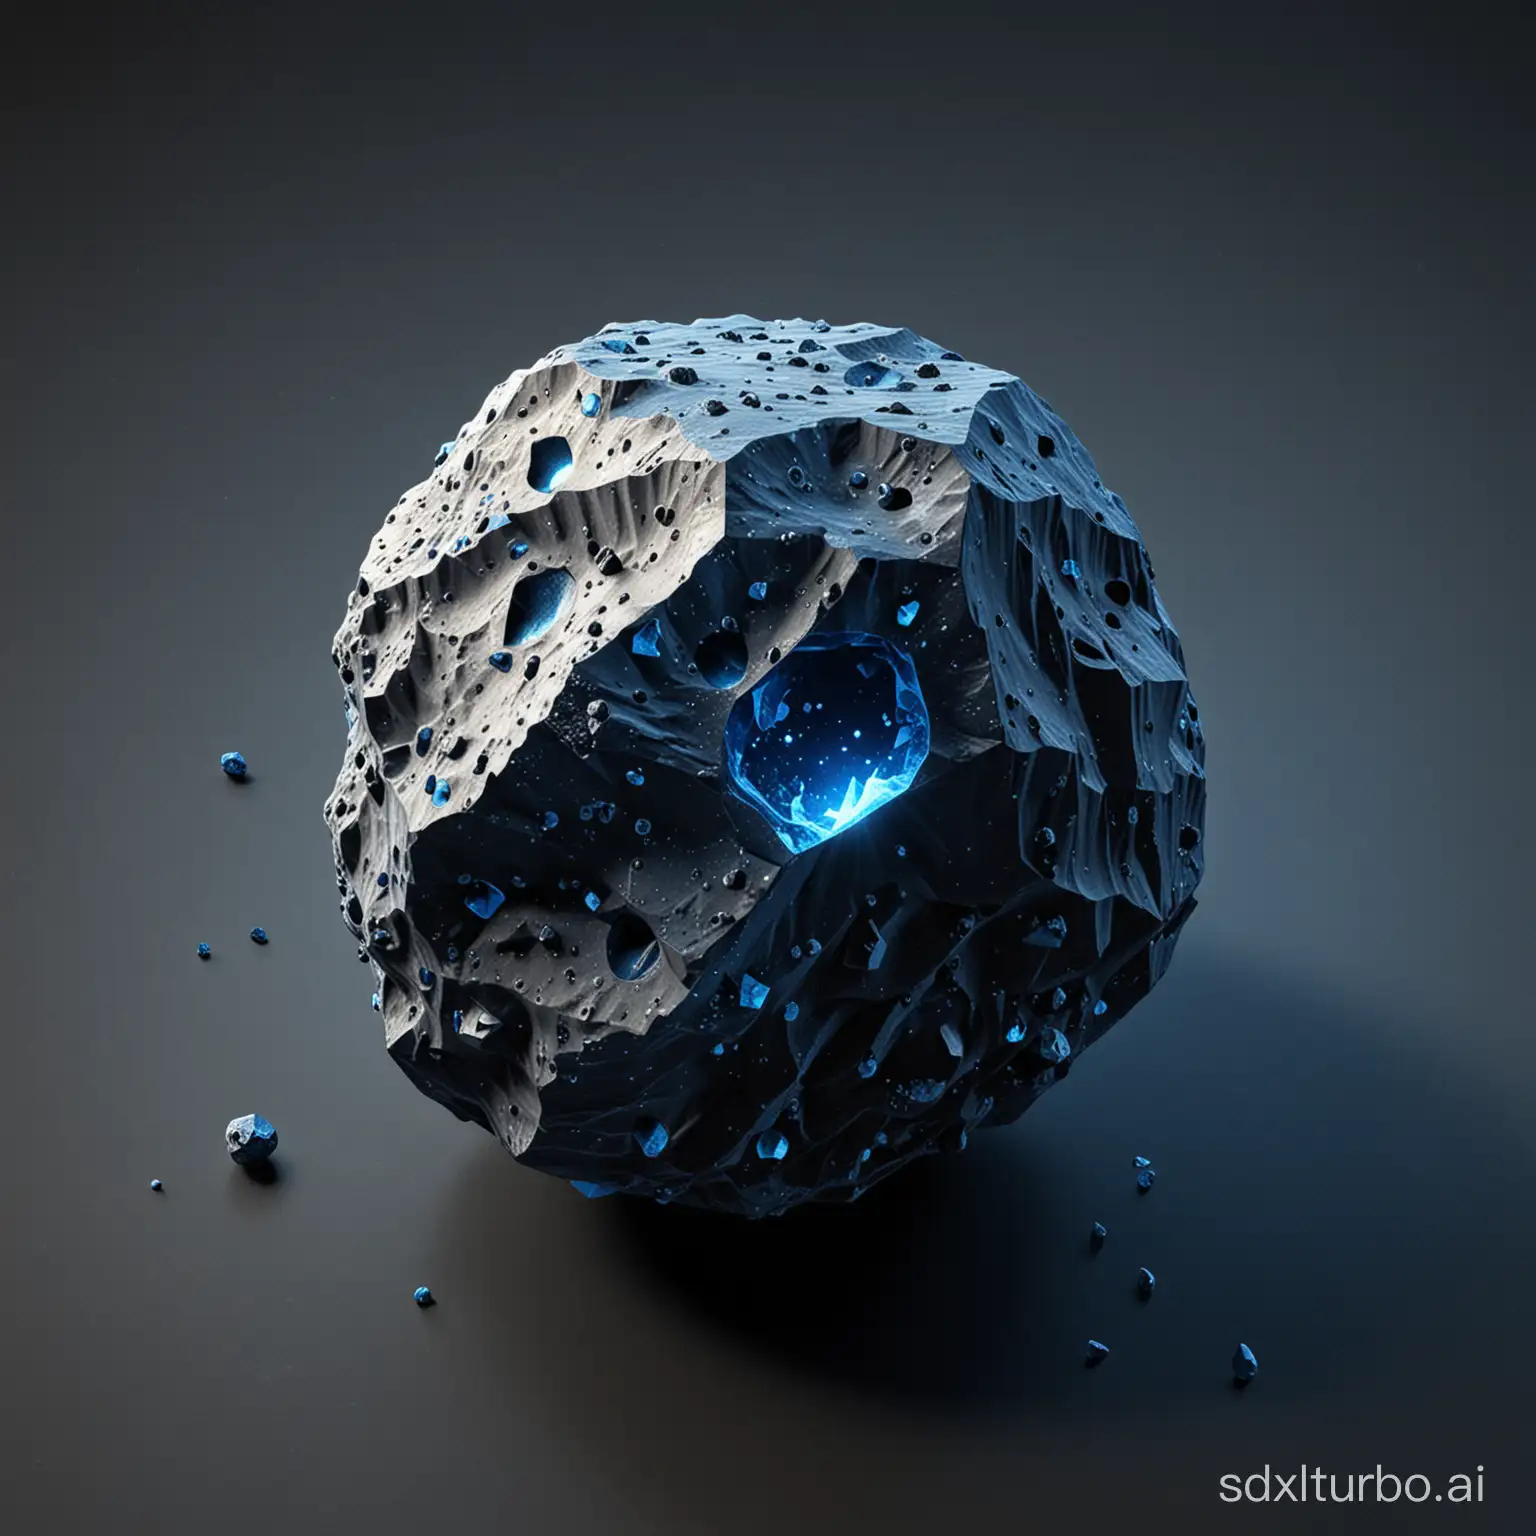 Isometric-Asteroid-with-Dark-Blue-Crystals-Mysterious-Extraterrestrial-Landscape